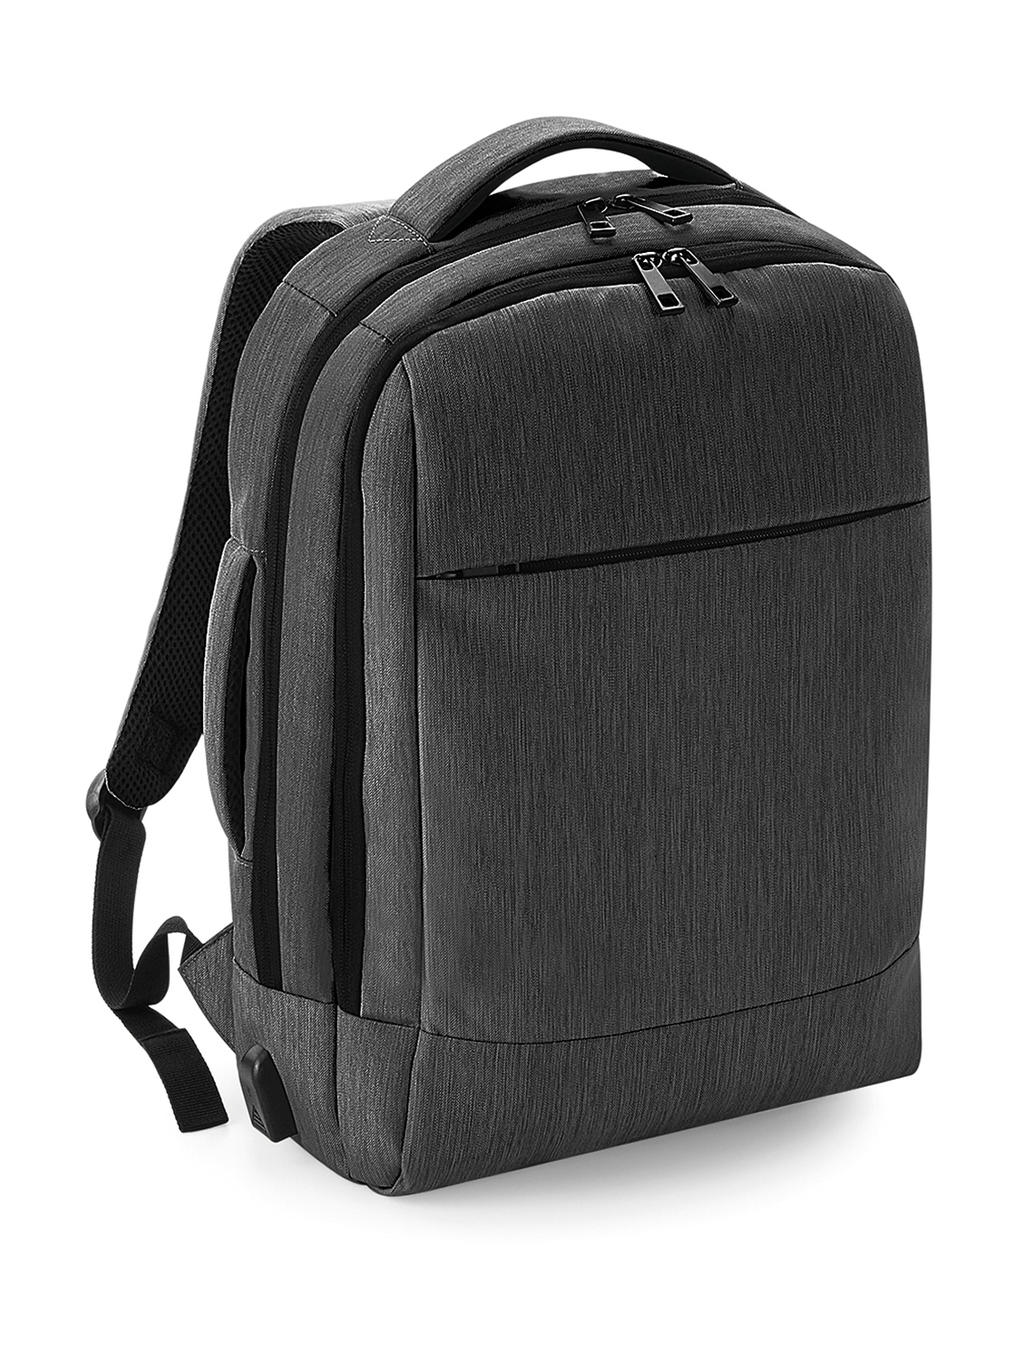  Q-Tech Charge Convertible Backpack in Farbe Granite Marl